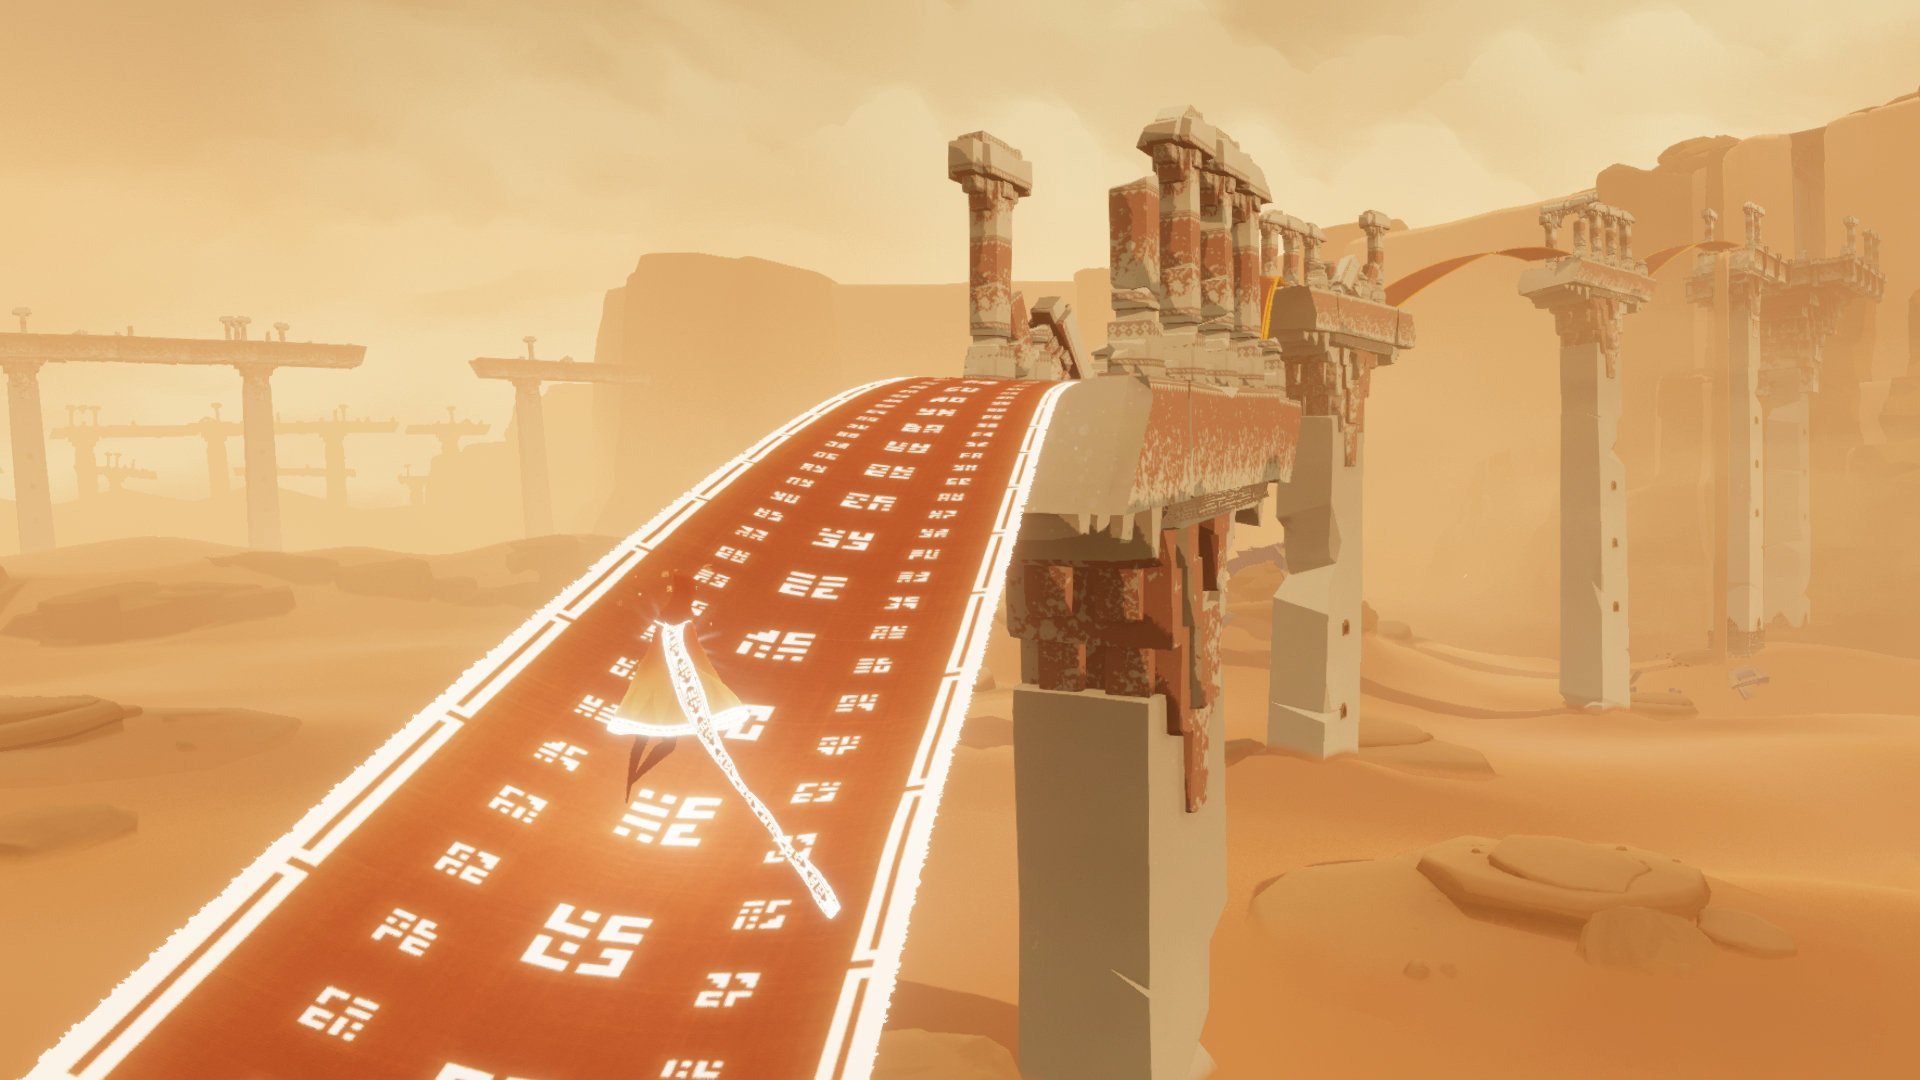 Journey is a good game to gift for people short on time